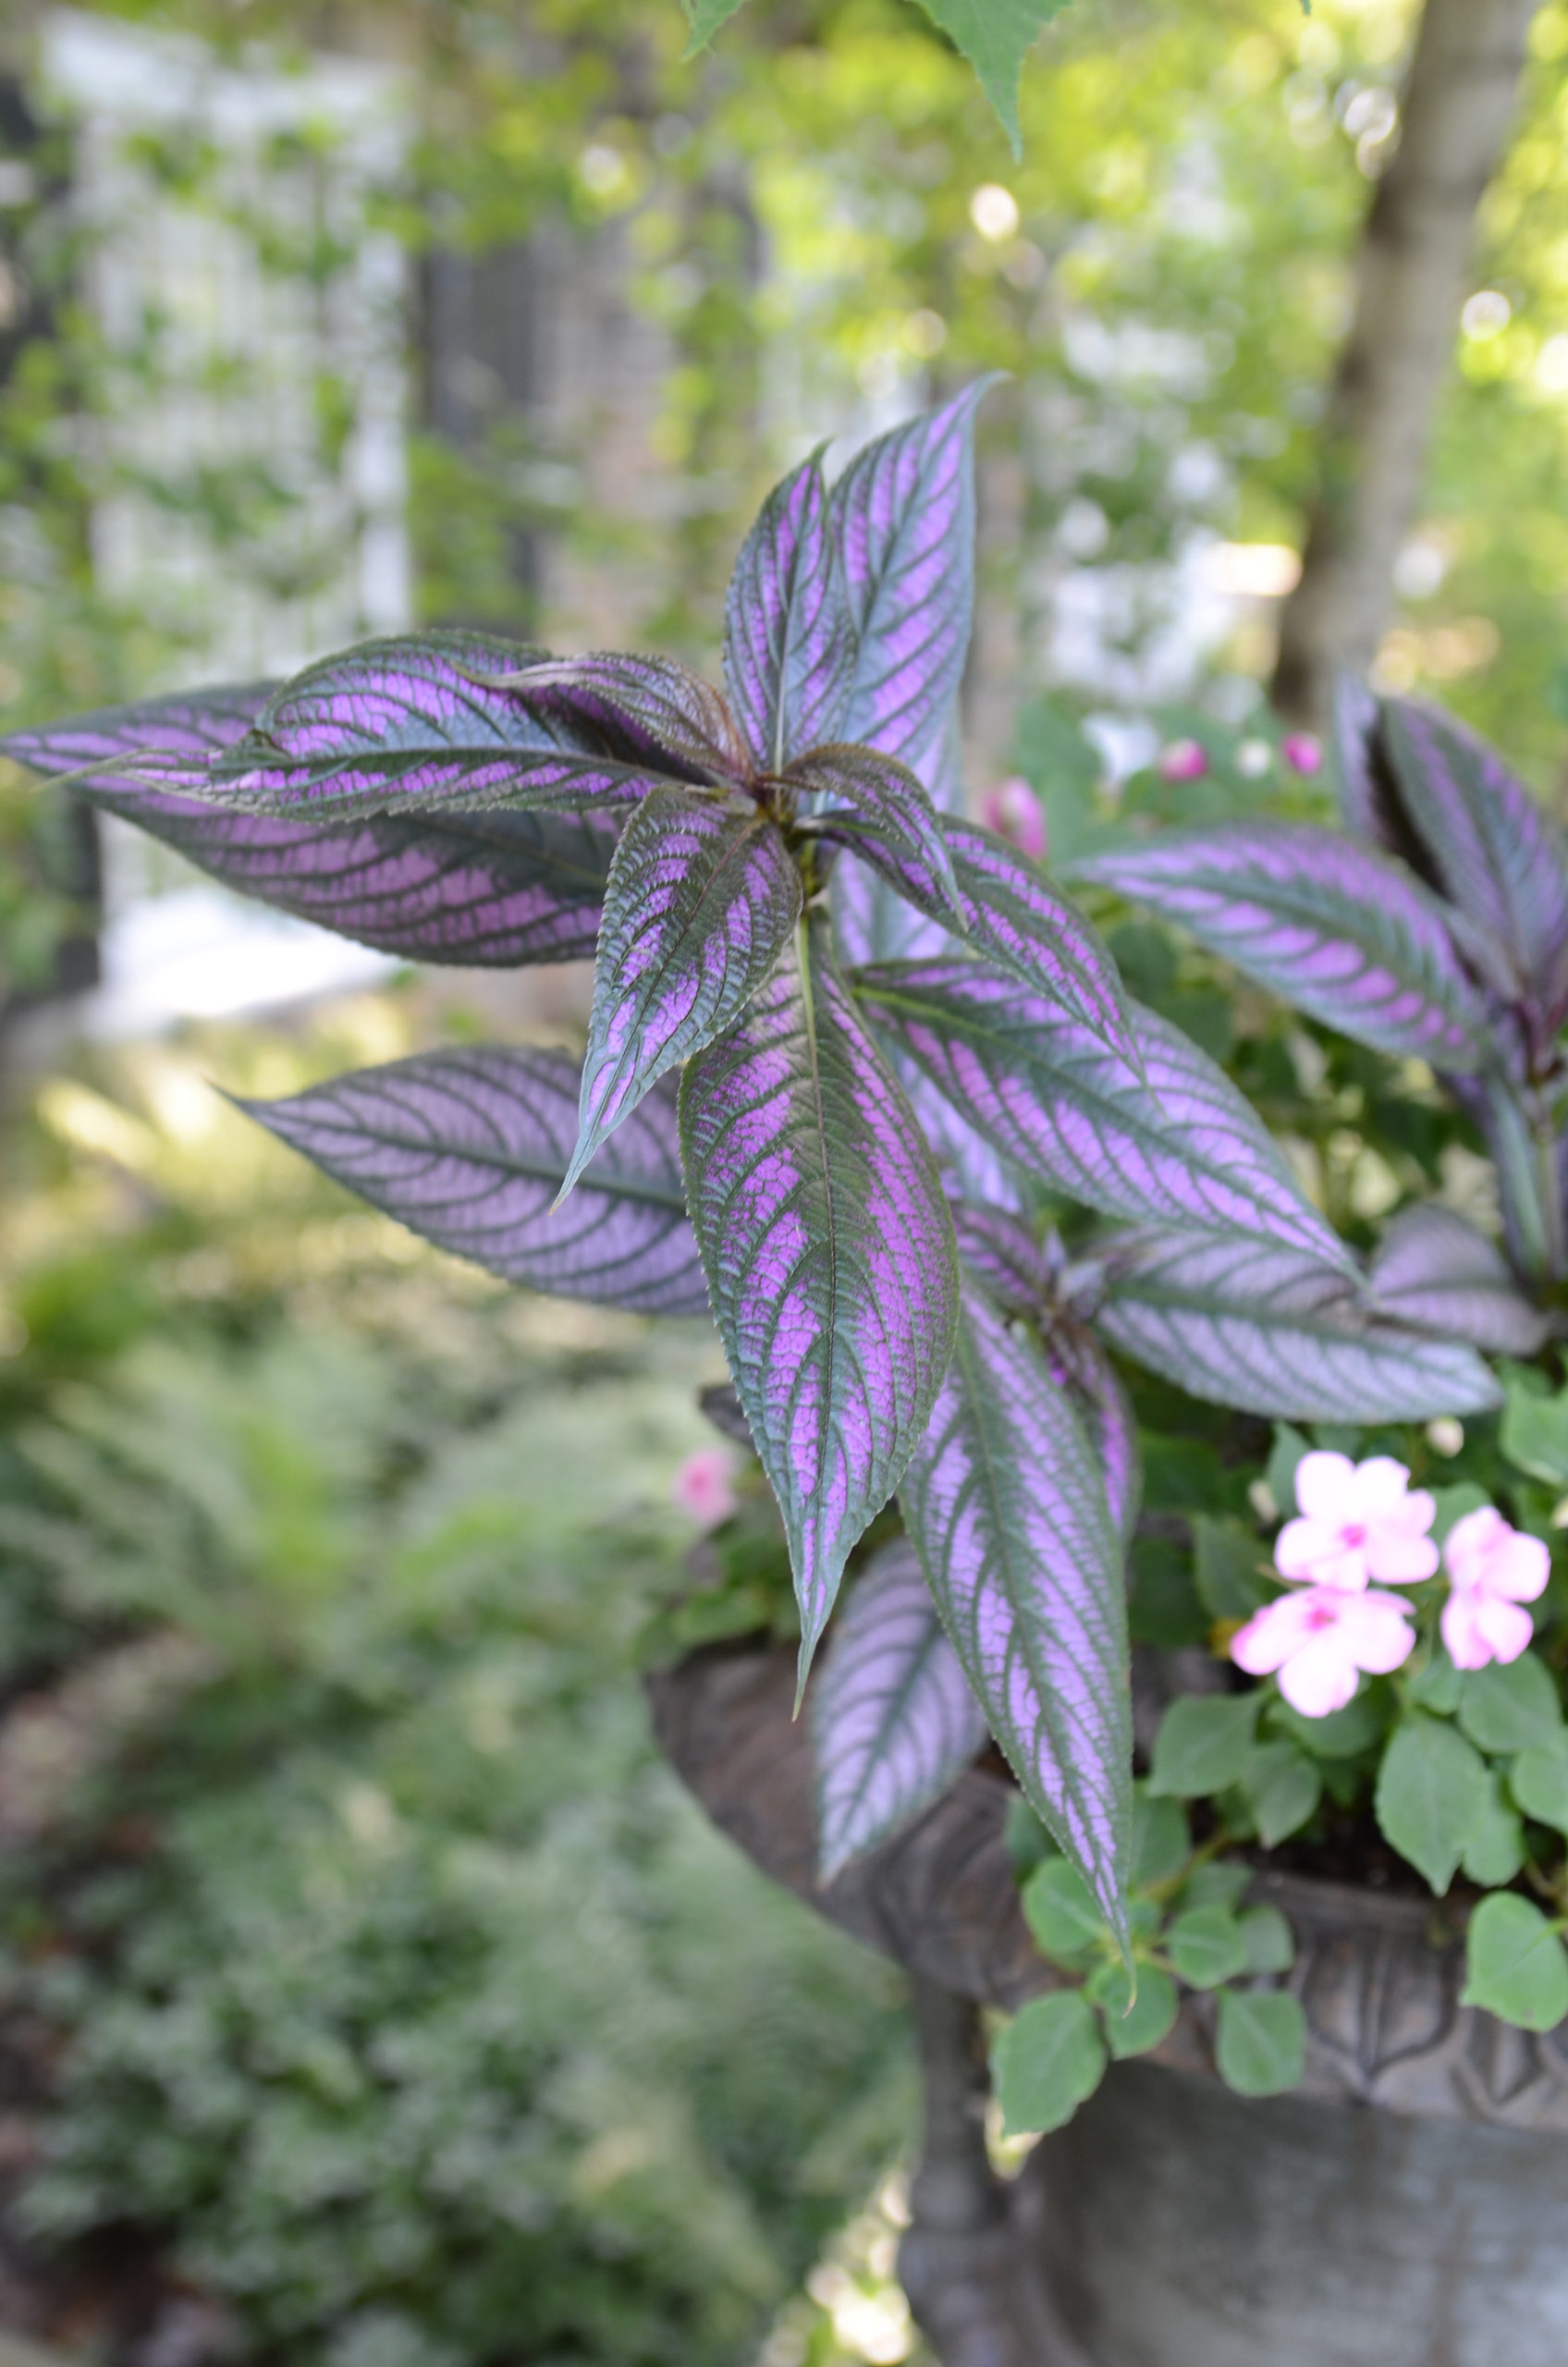 The Persian Shield (Strobilanthes) is a tropical plant that’s now widely used seasonally in many gardens. The foliage color and strong stems make it perfect for some cut flower arrangements. ANDREW MESSINGER